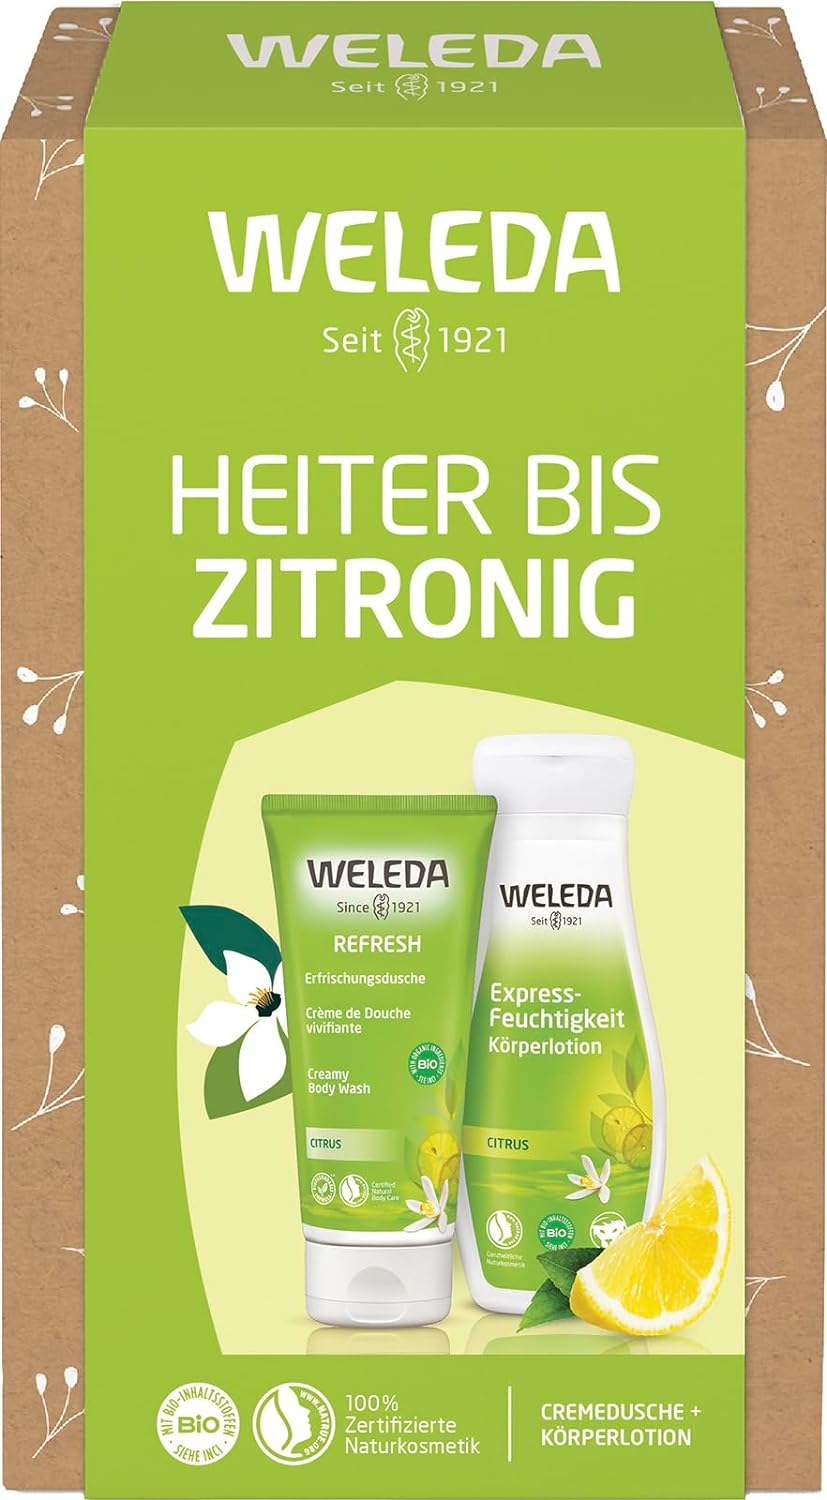 WELEDA Organic Gift Set Citrus - Natural Cosmetics Gift Box Consisting of Refresh Shower Gel & Express Moisture Body Lotion Optimal Gift Set for Men and Women for Daily Body Care